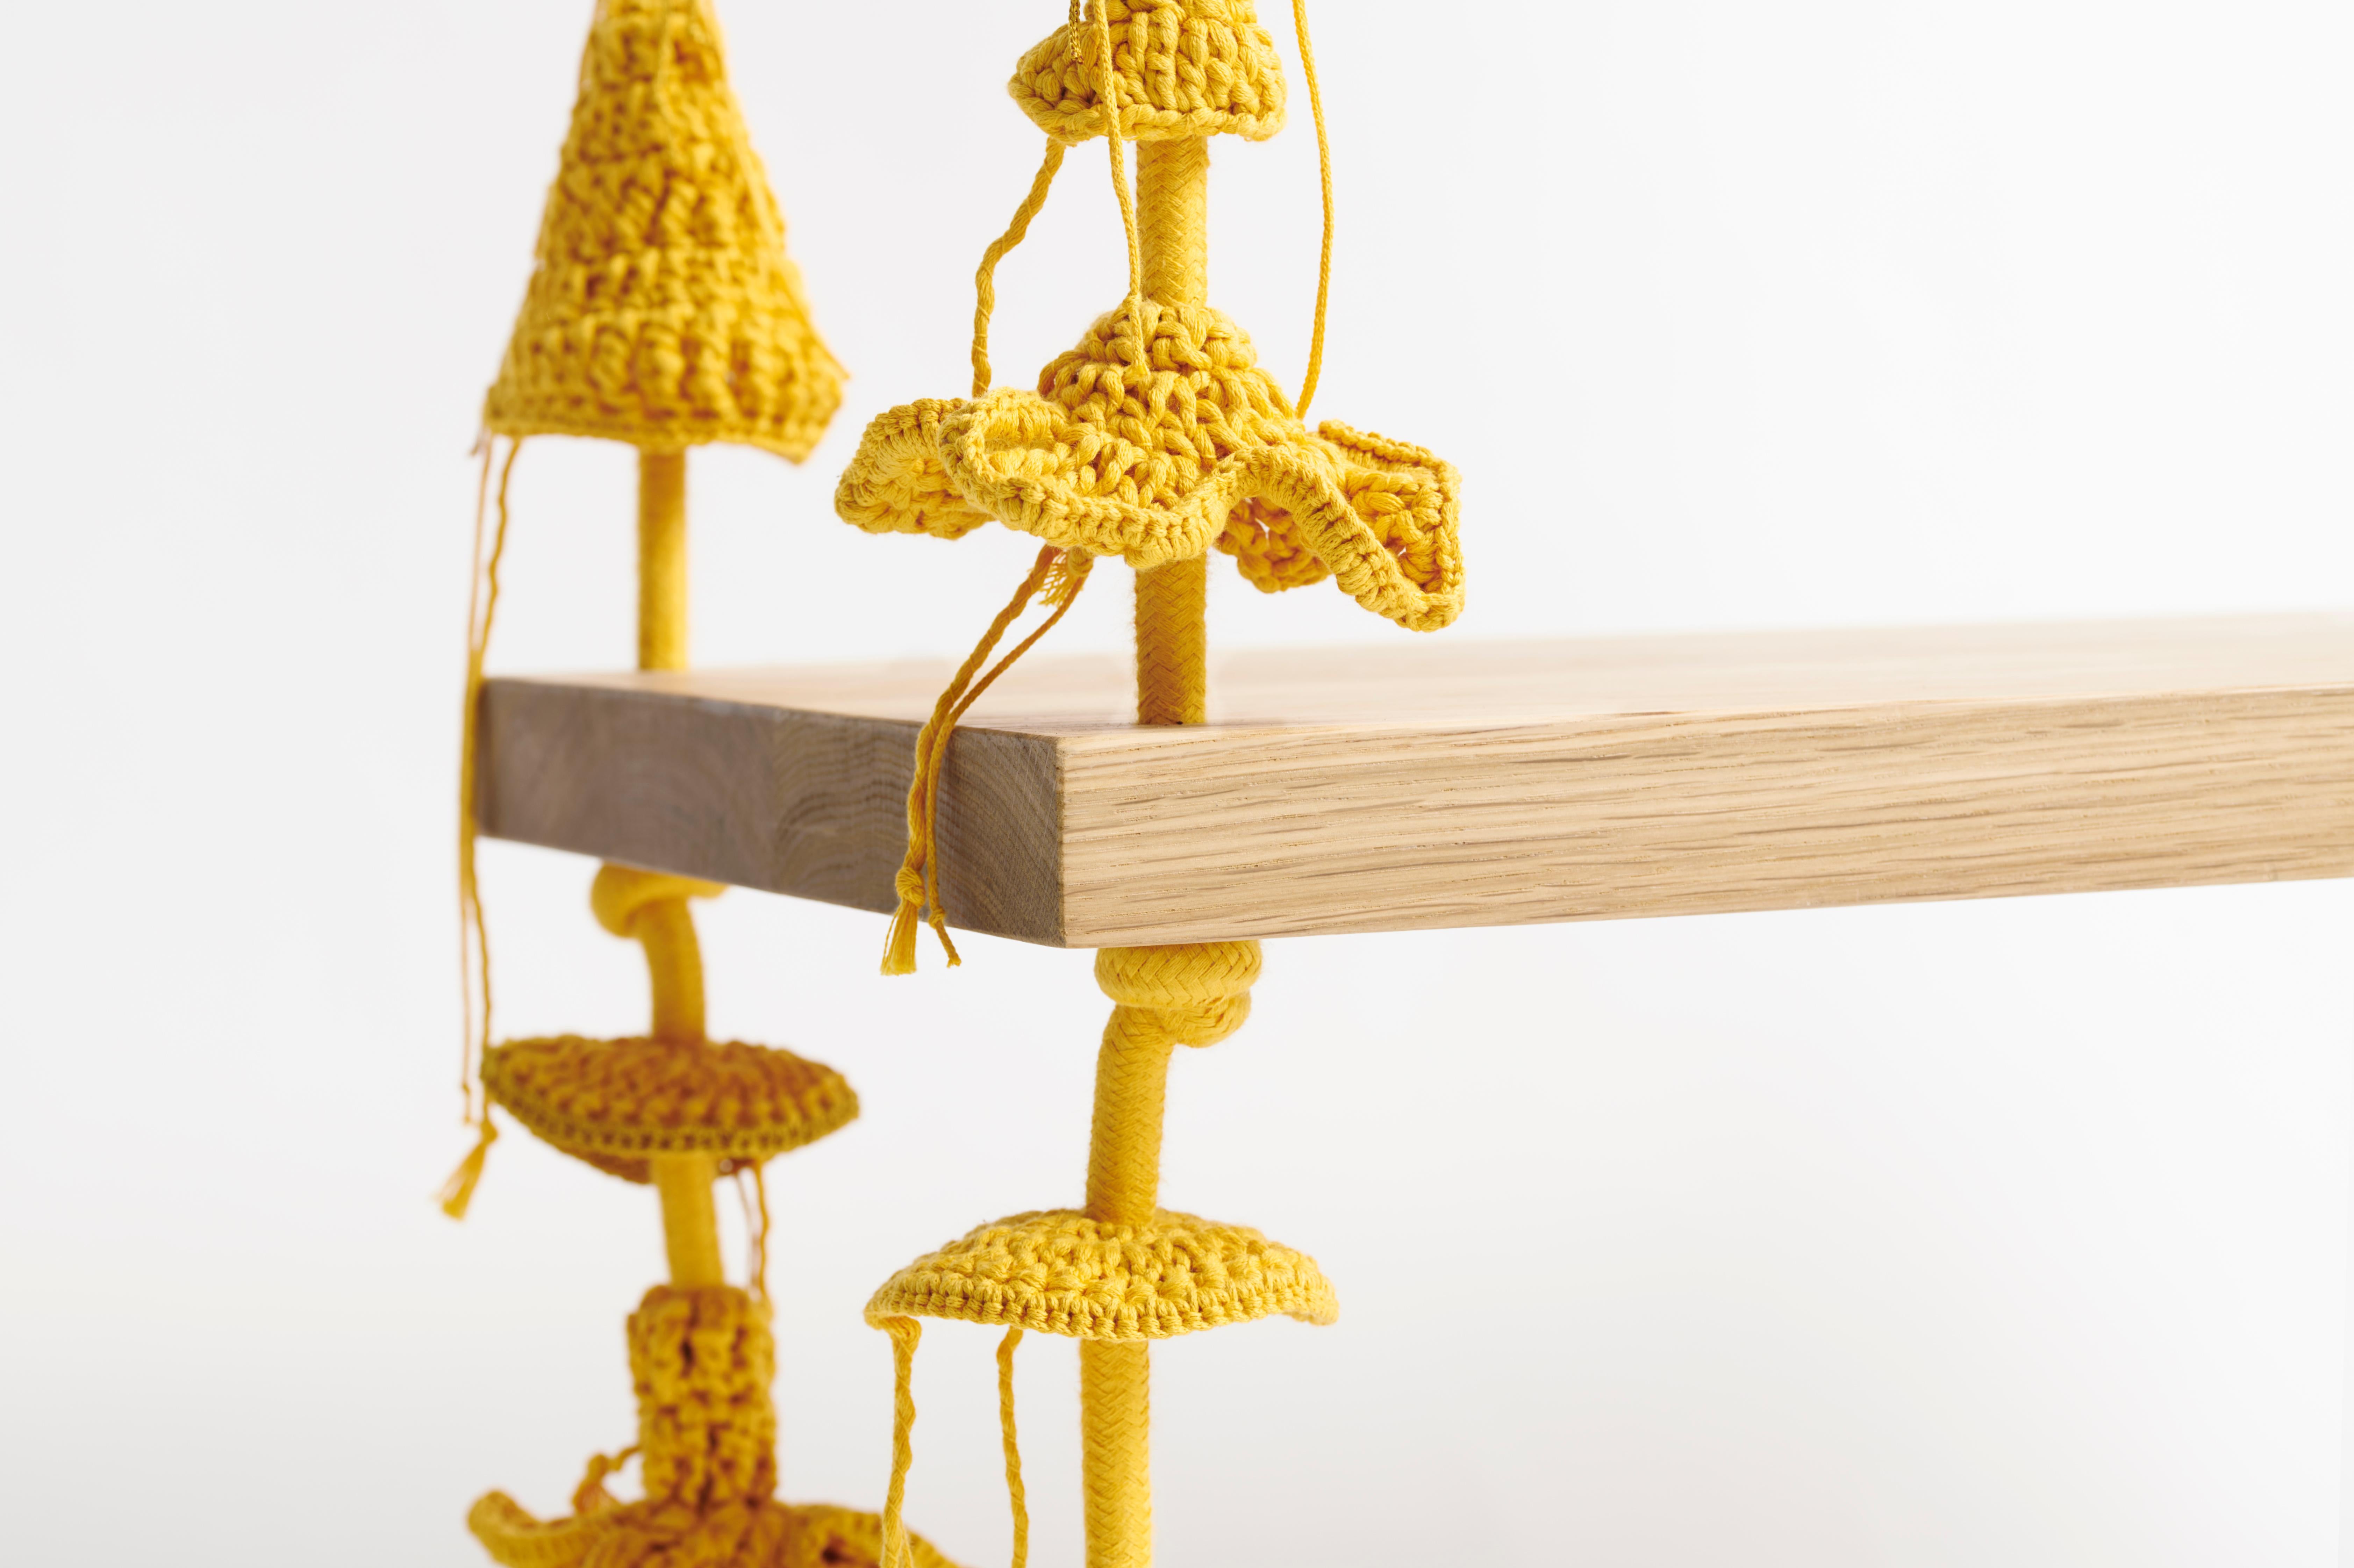 Contemporary Gold Textile Swing Handmade Crochet in Cotton and Polyester with Oak Wood Seat